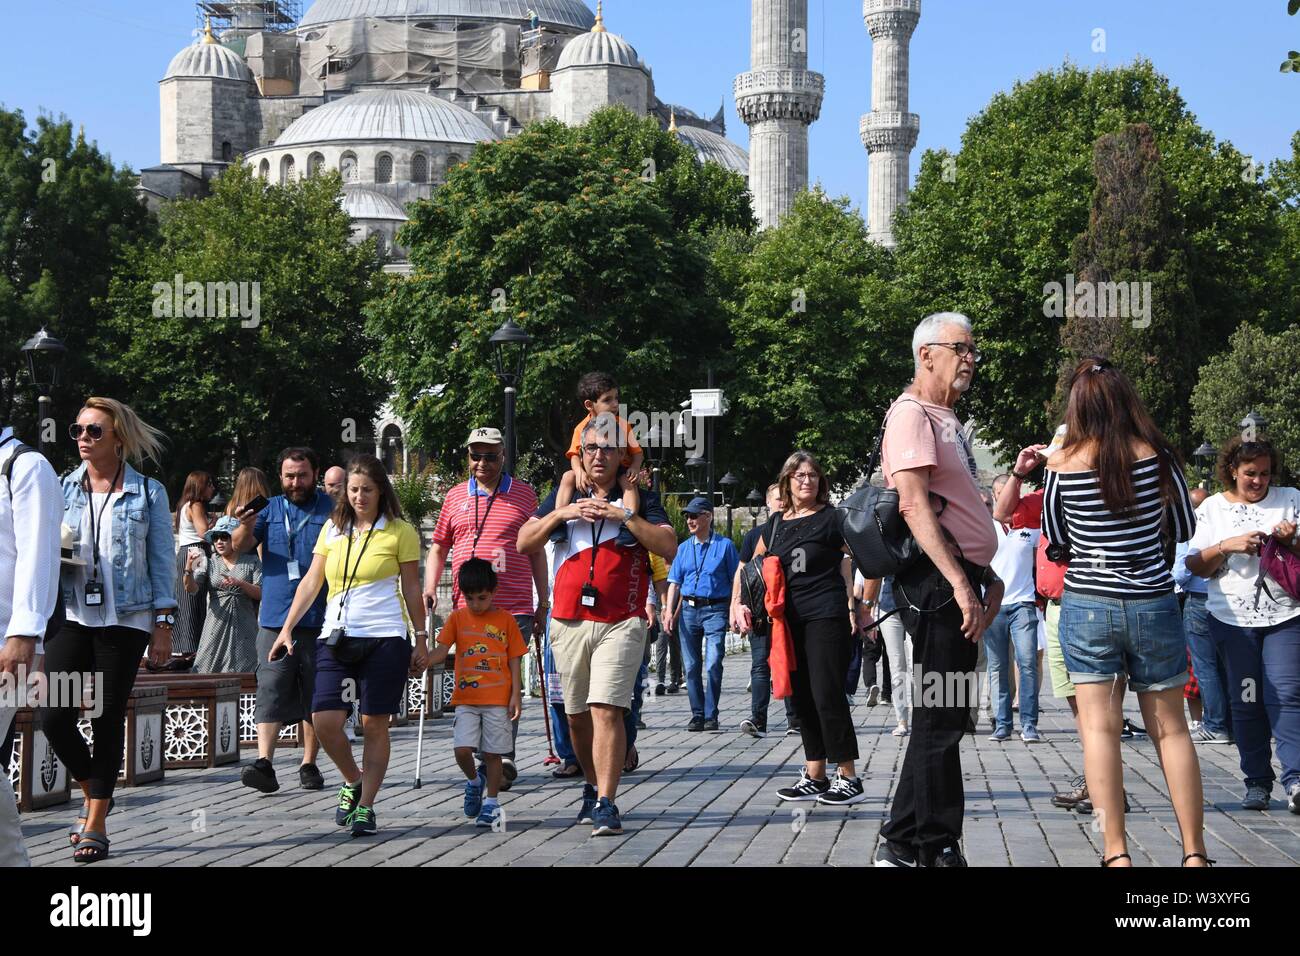 Istanbul, Turkey. 6th July, 2019. Tourists visit the Sultanahmet Square in  Istanbul, Turkey, July 6, 2019. Turkey's biggest city Istanbul allured a  record number of tourists during the first five months of